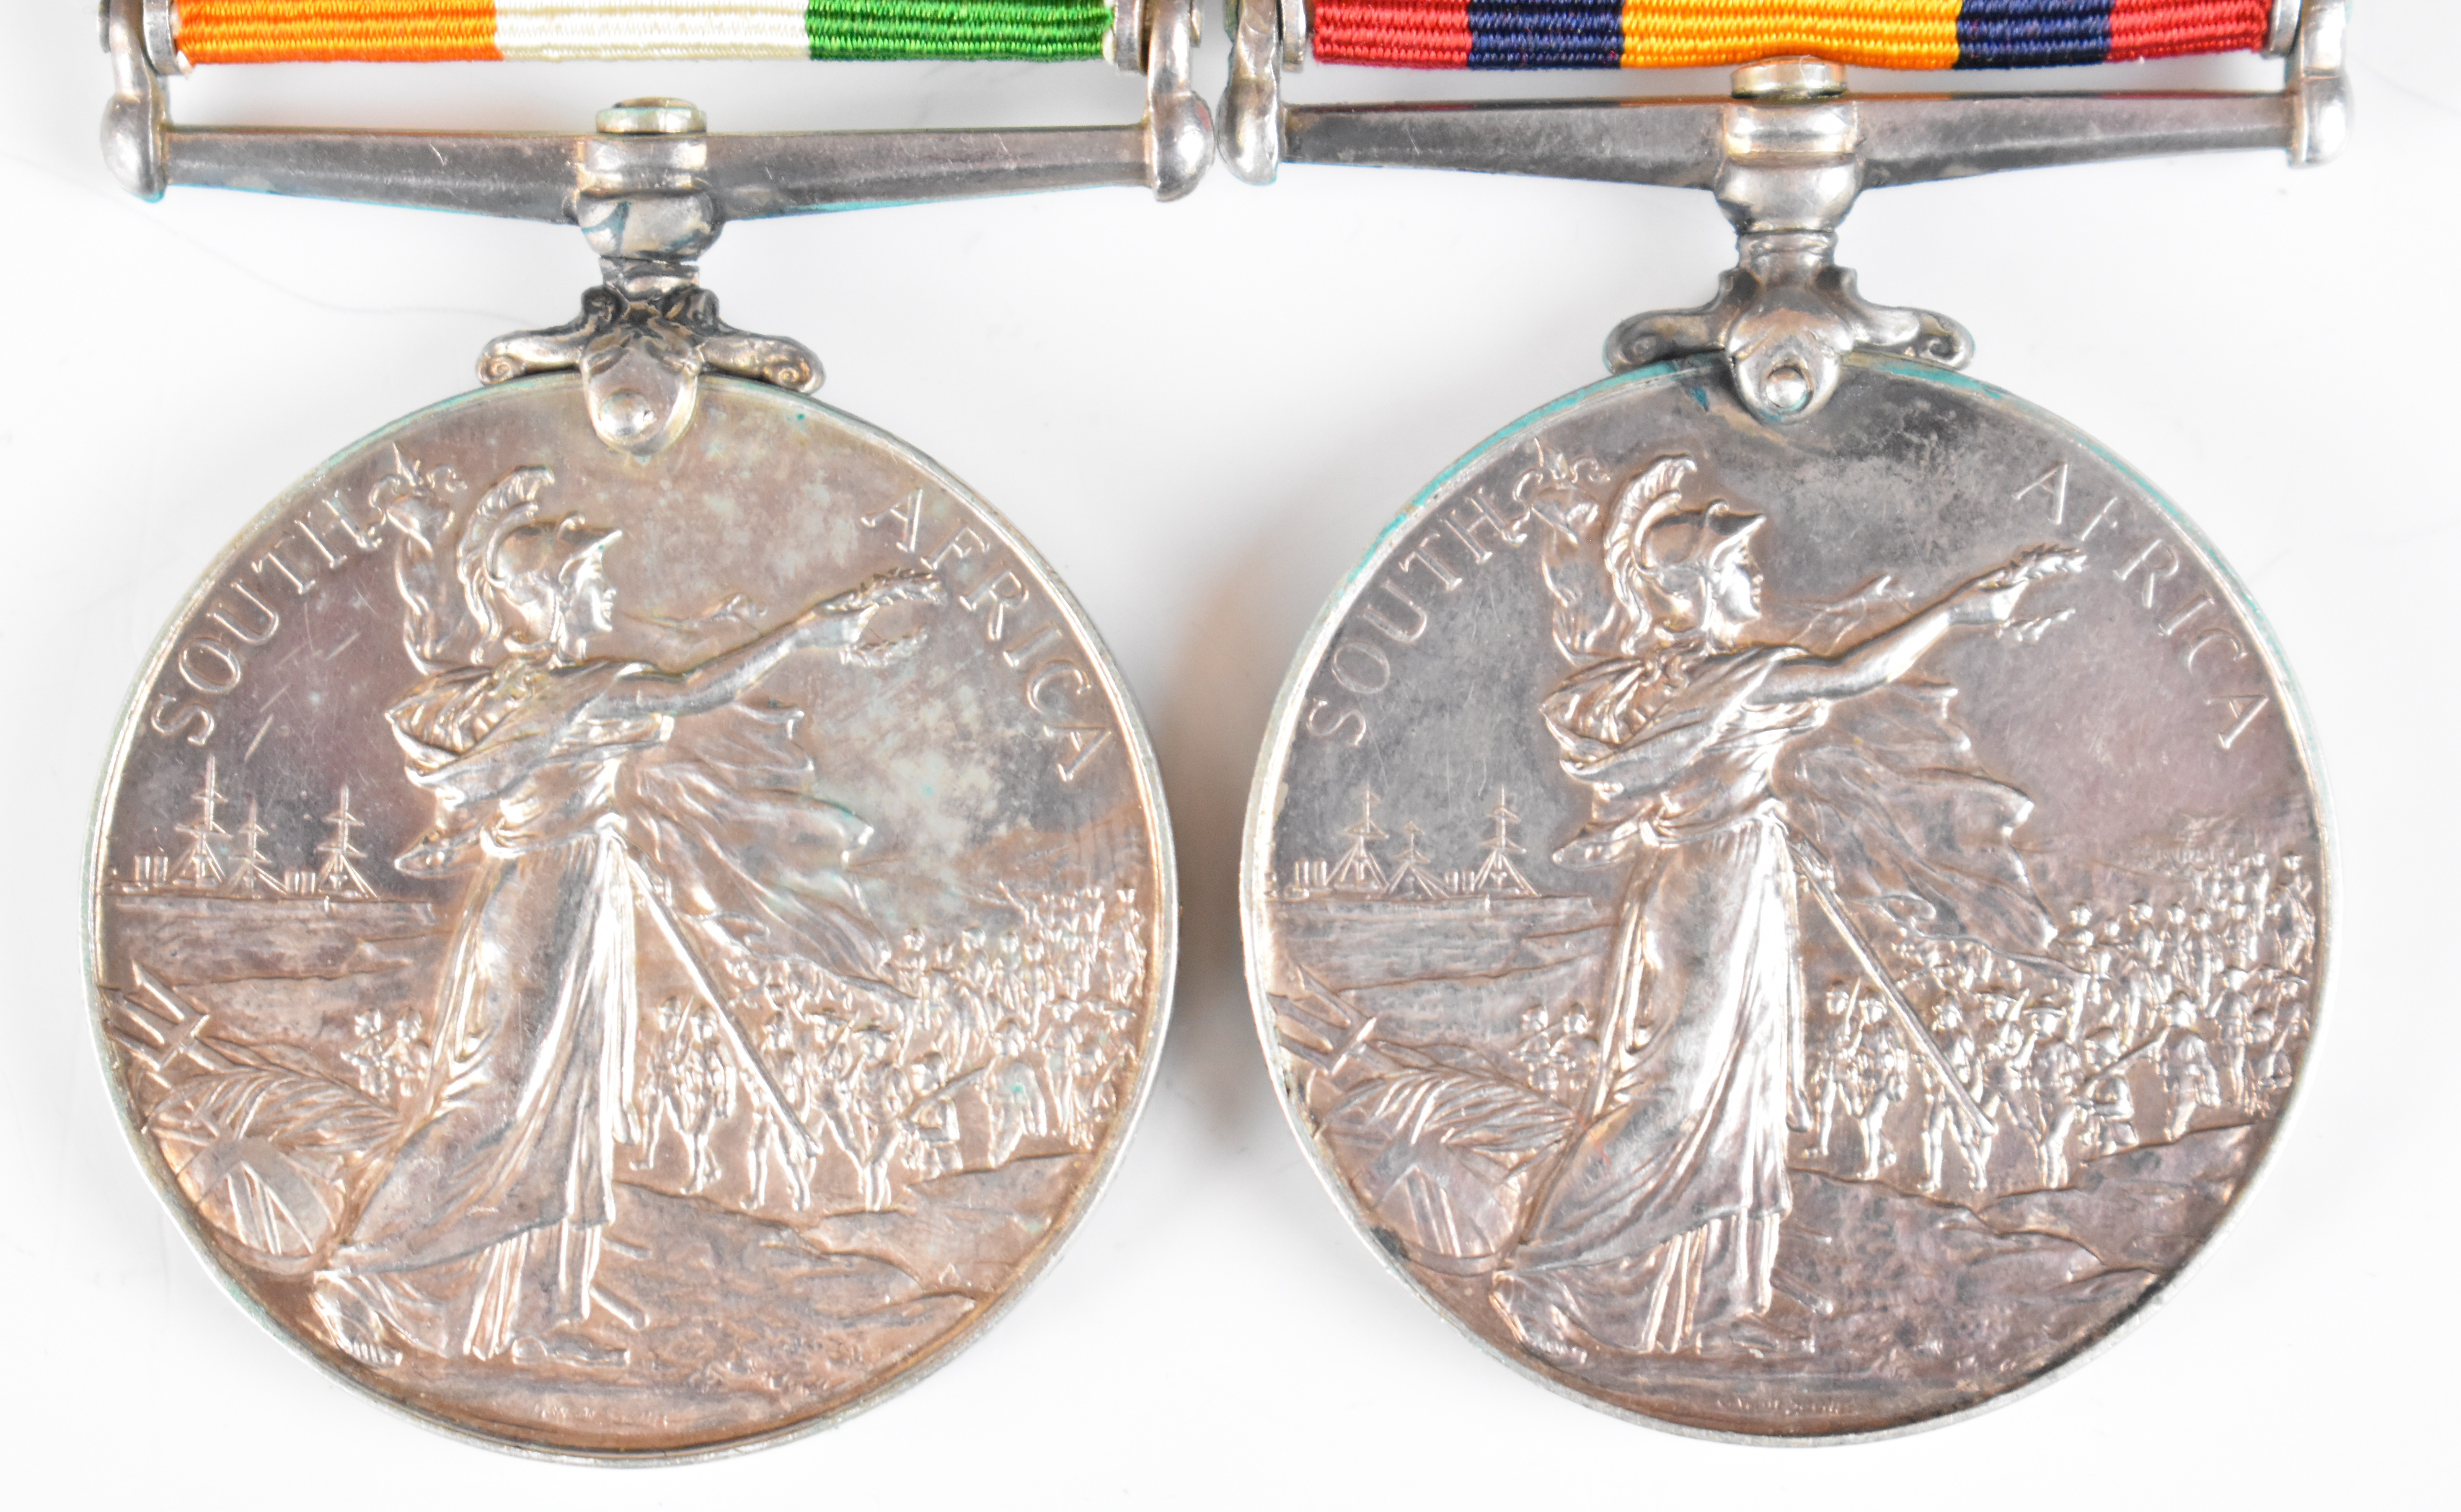 Queen's South Africa Medal with eight clasps for Belmont, Modder River, Relief of Kimberley, - Image 8 of 20